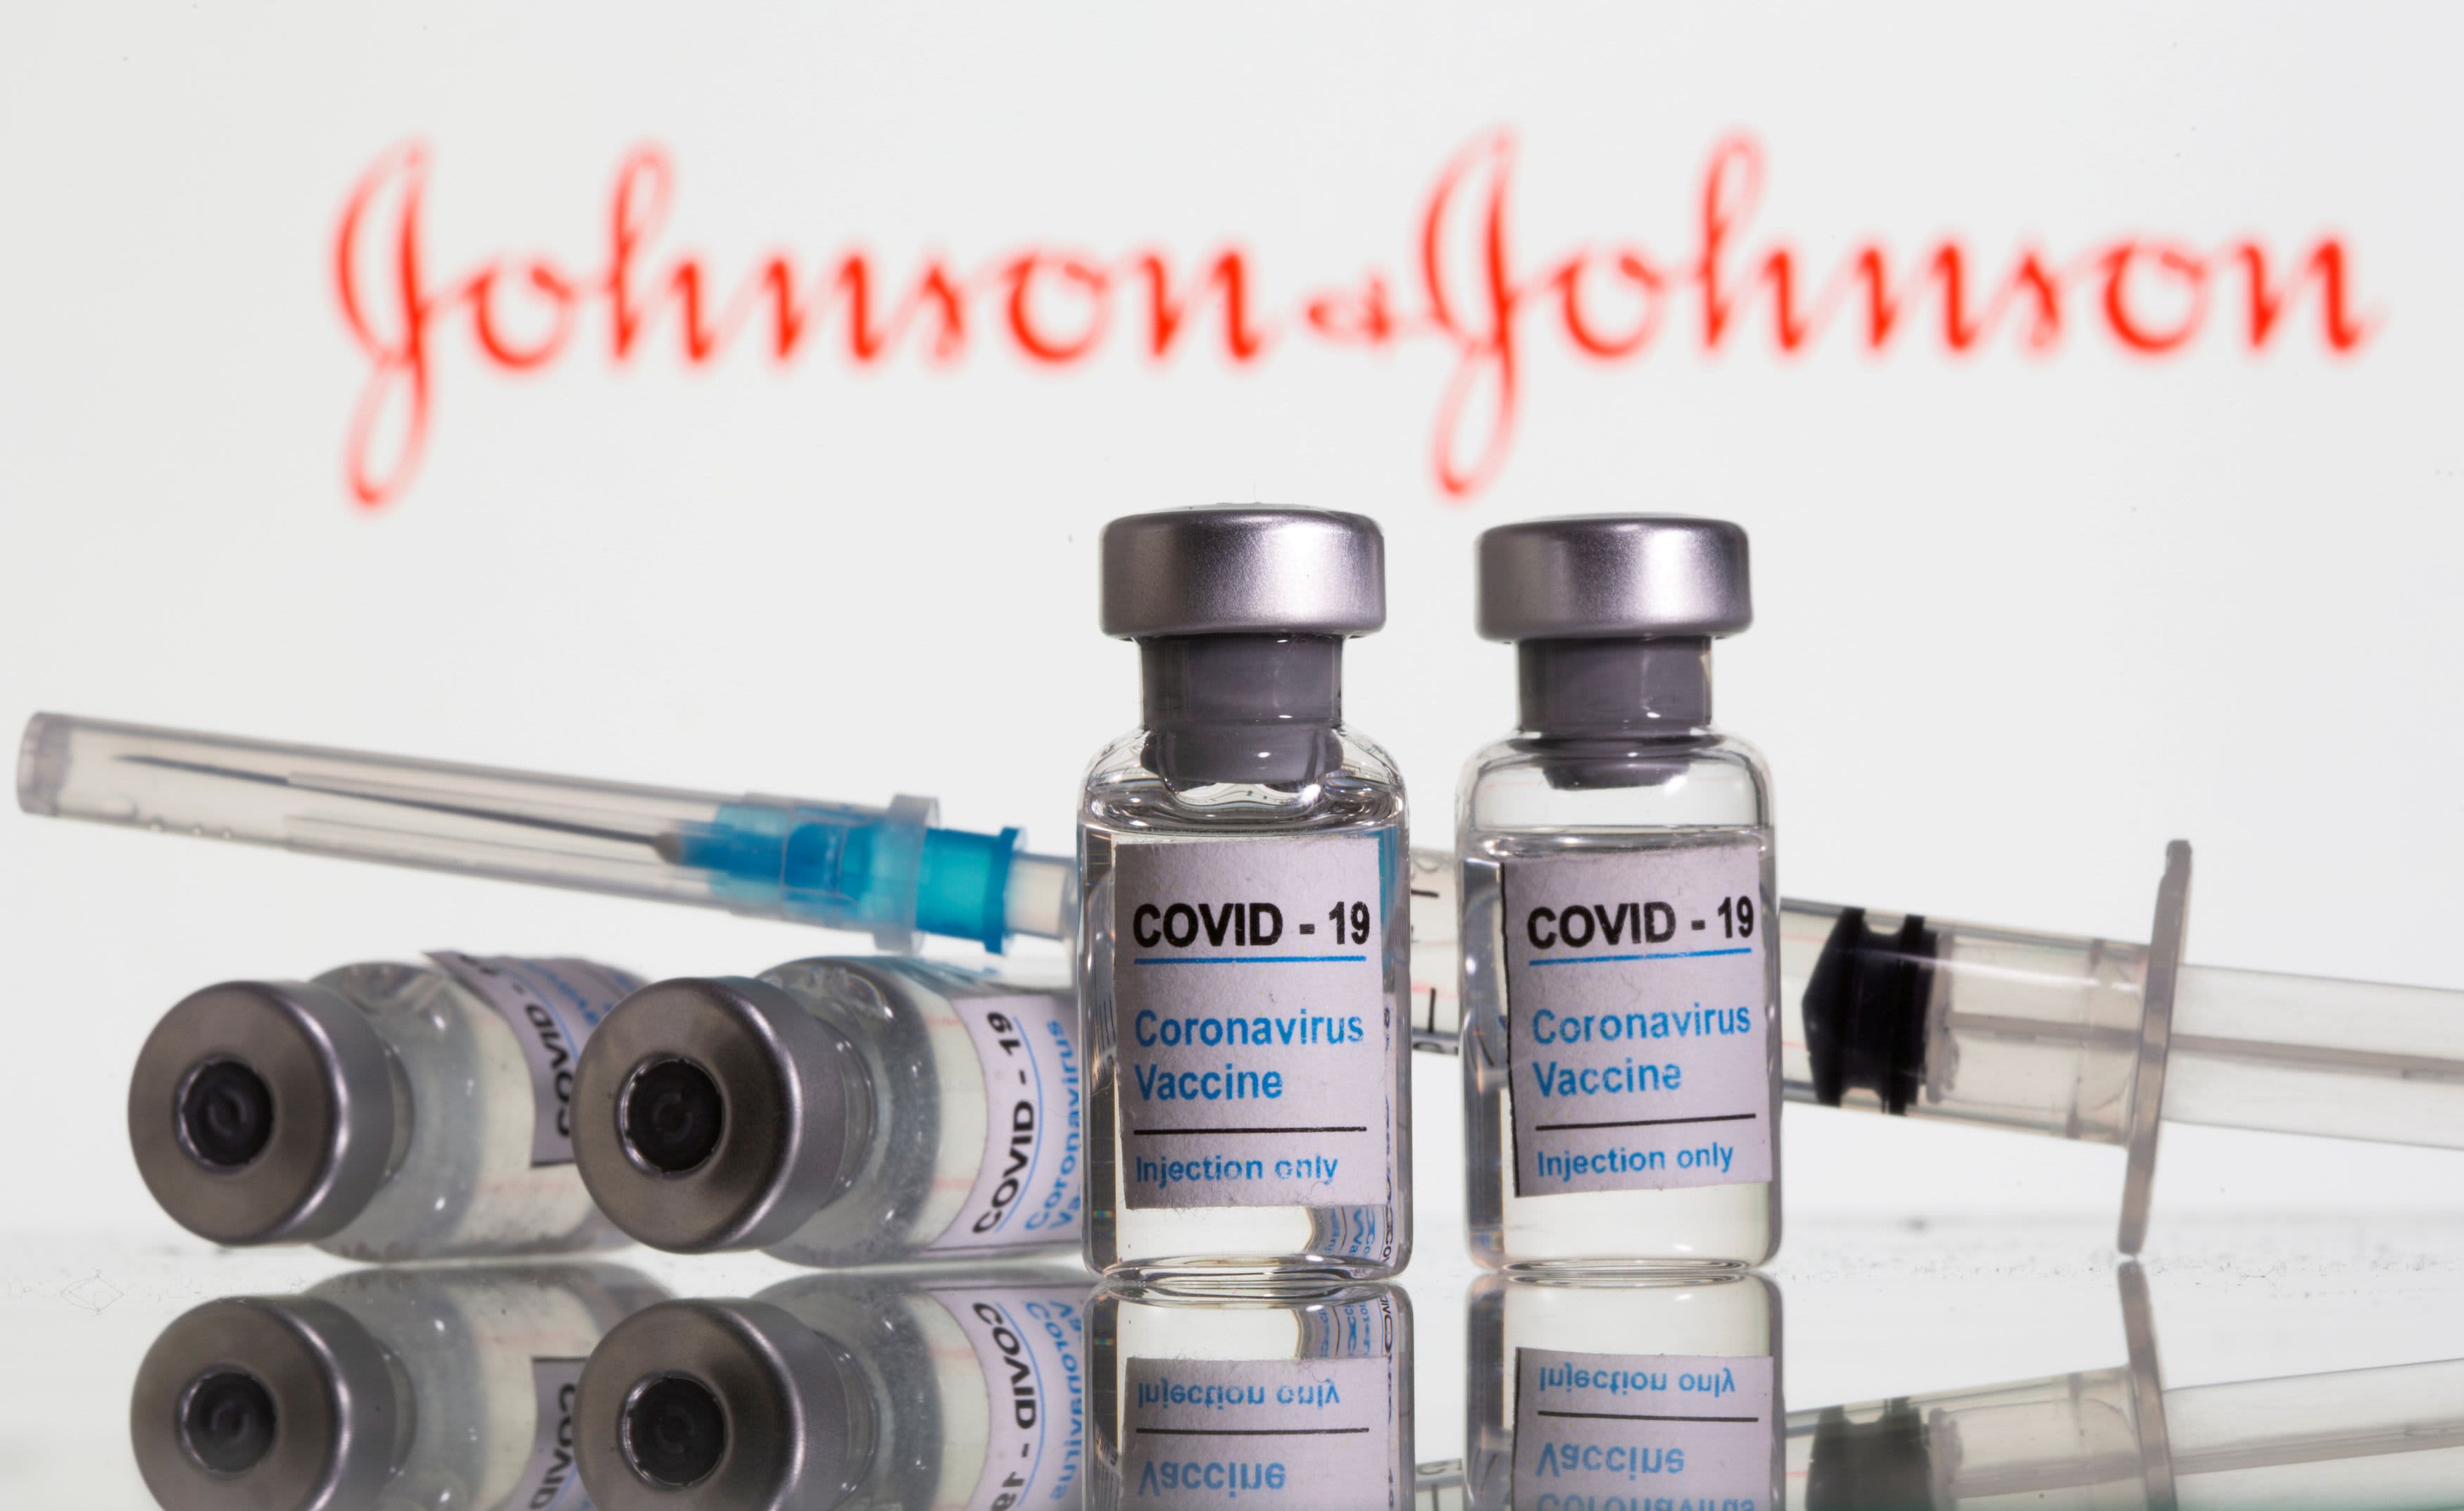 Discontinuation of J&J Covid vaccine will have far-reaching effects: Dr. Kavita Patel